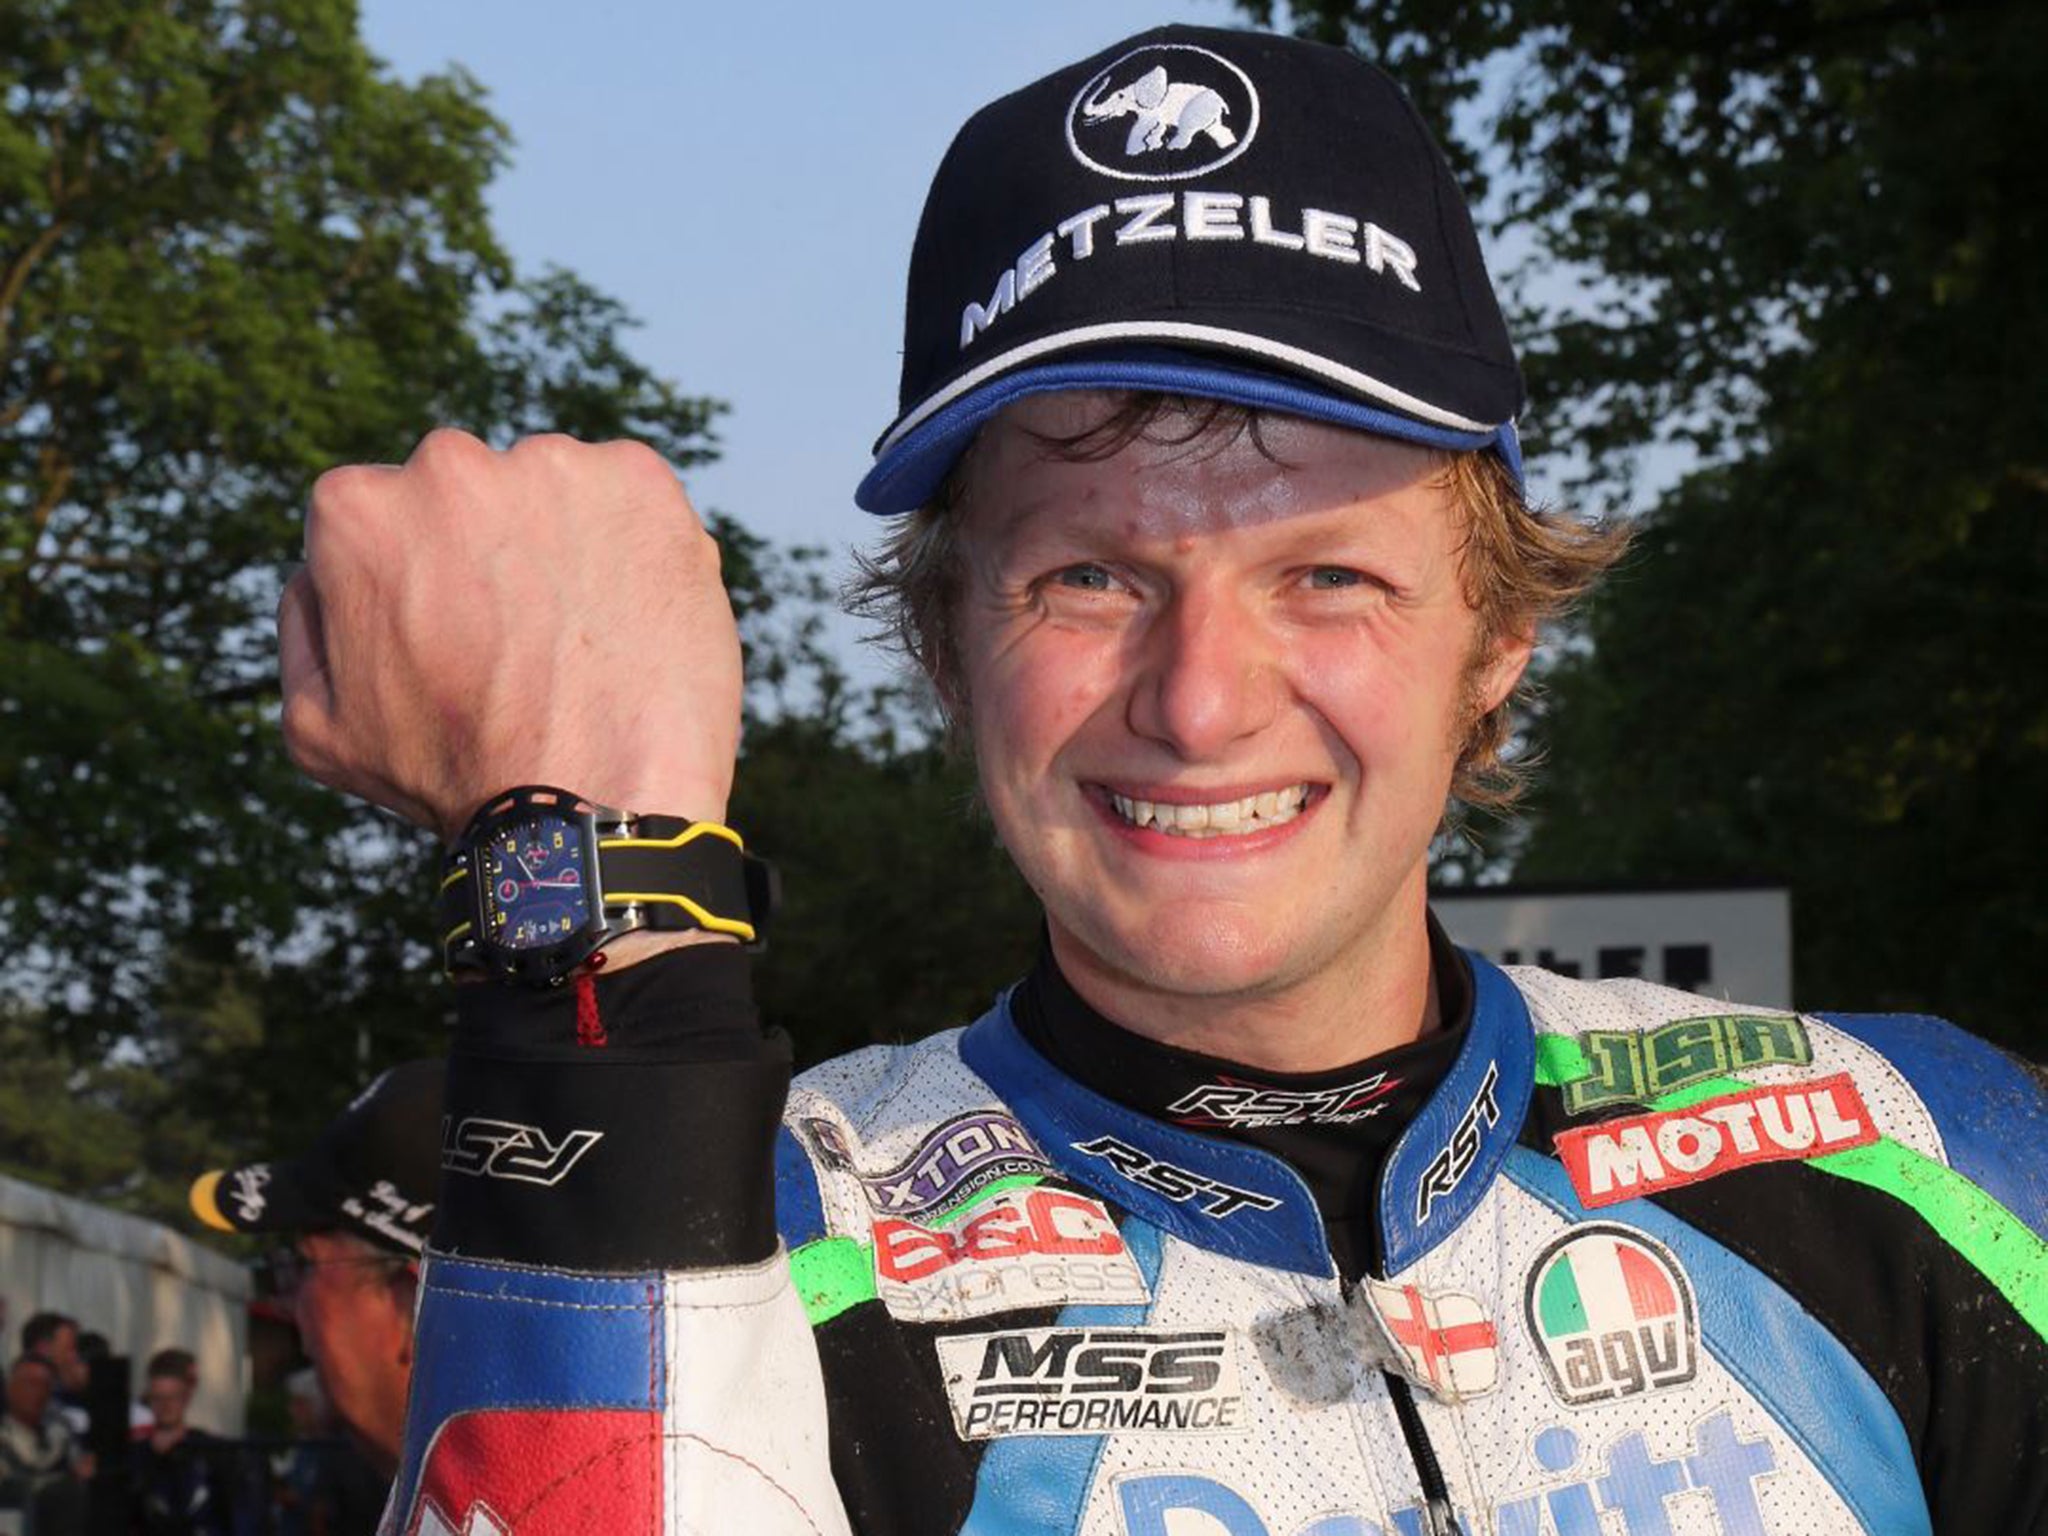 Two-time Isle of Man TT winner Lintin is in a critical condition